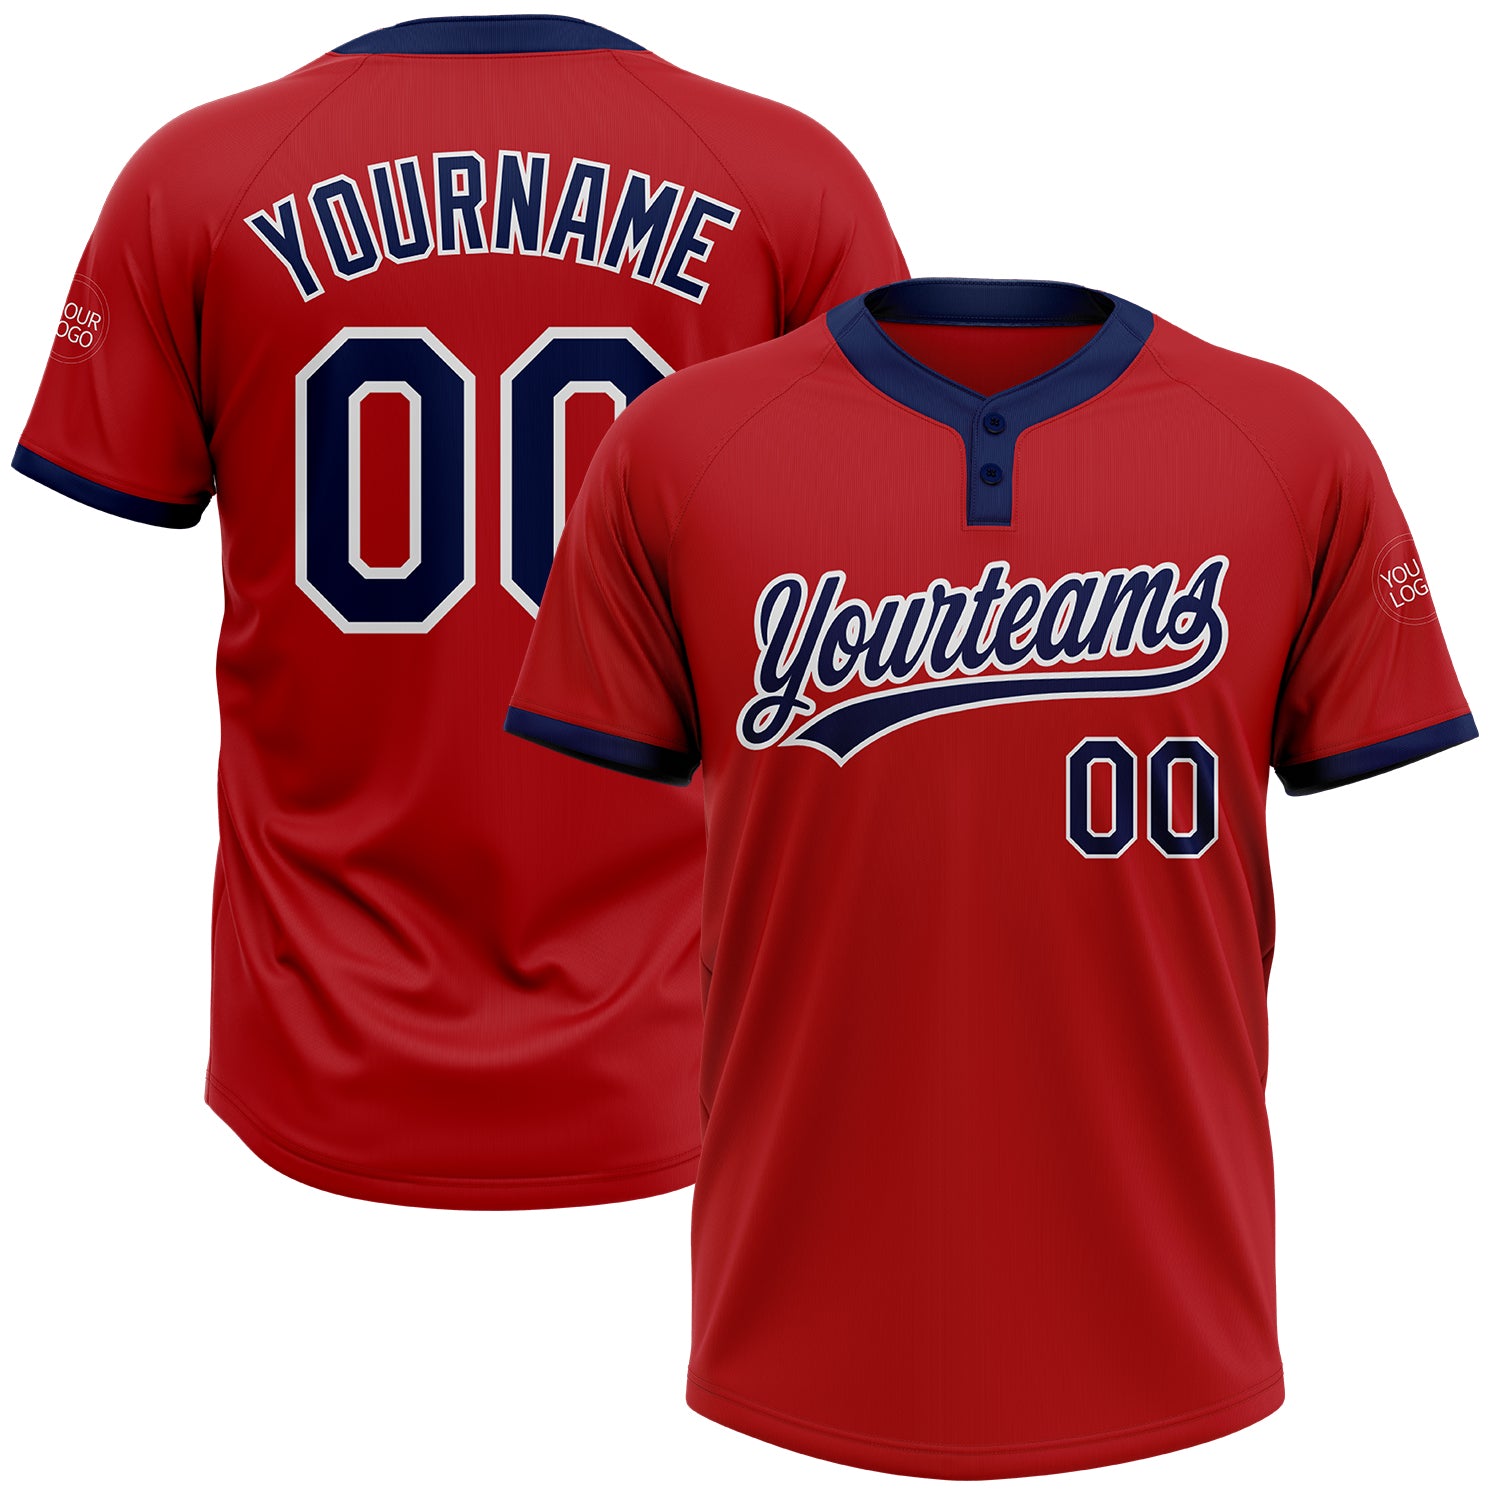 Custom White Navy-Red Two-Button Unisex Softball Jersey Discount